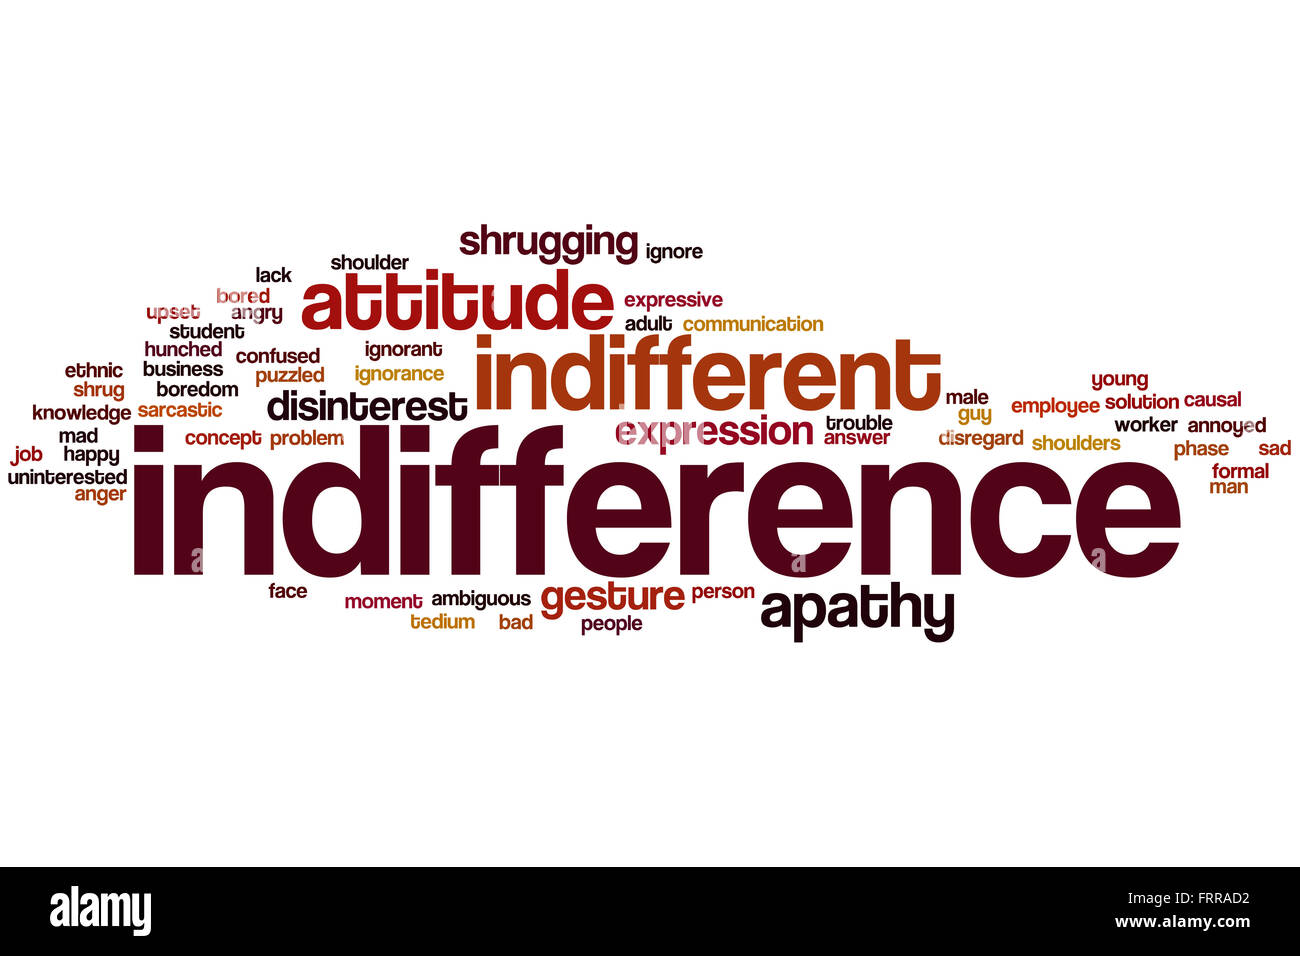 Indifference word cloud concept with disinterest ignore related tags Stock Photo